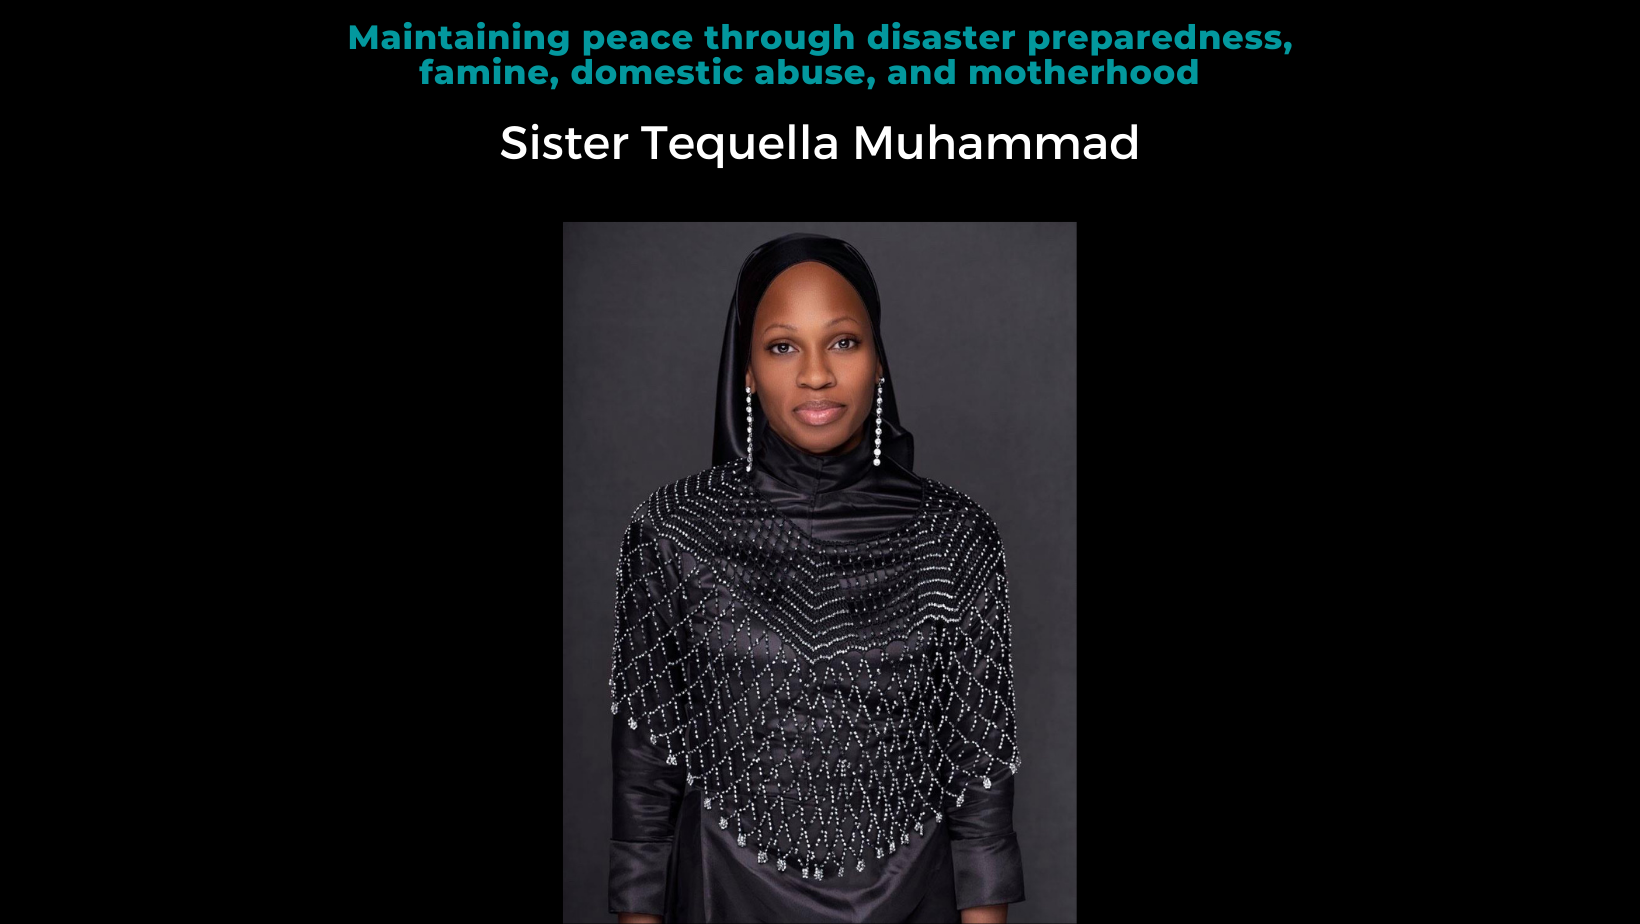 Maintaining peace through disaster preparedness, famine, domestic abuse, and motherhood with Sister Tequella Muhammad